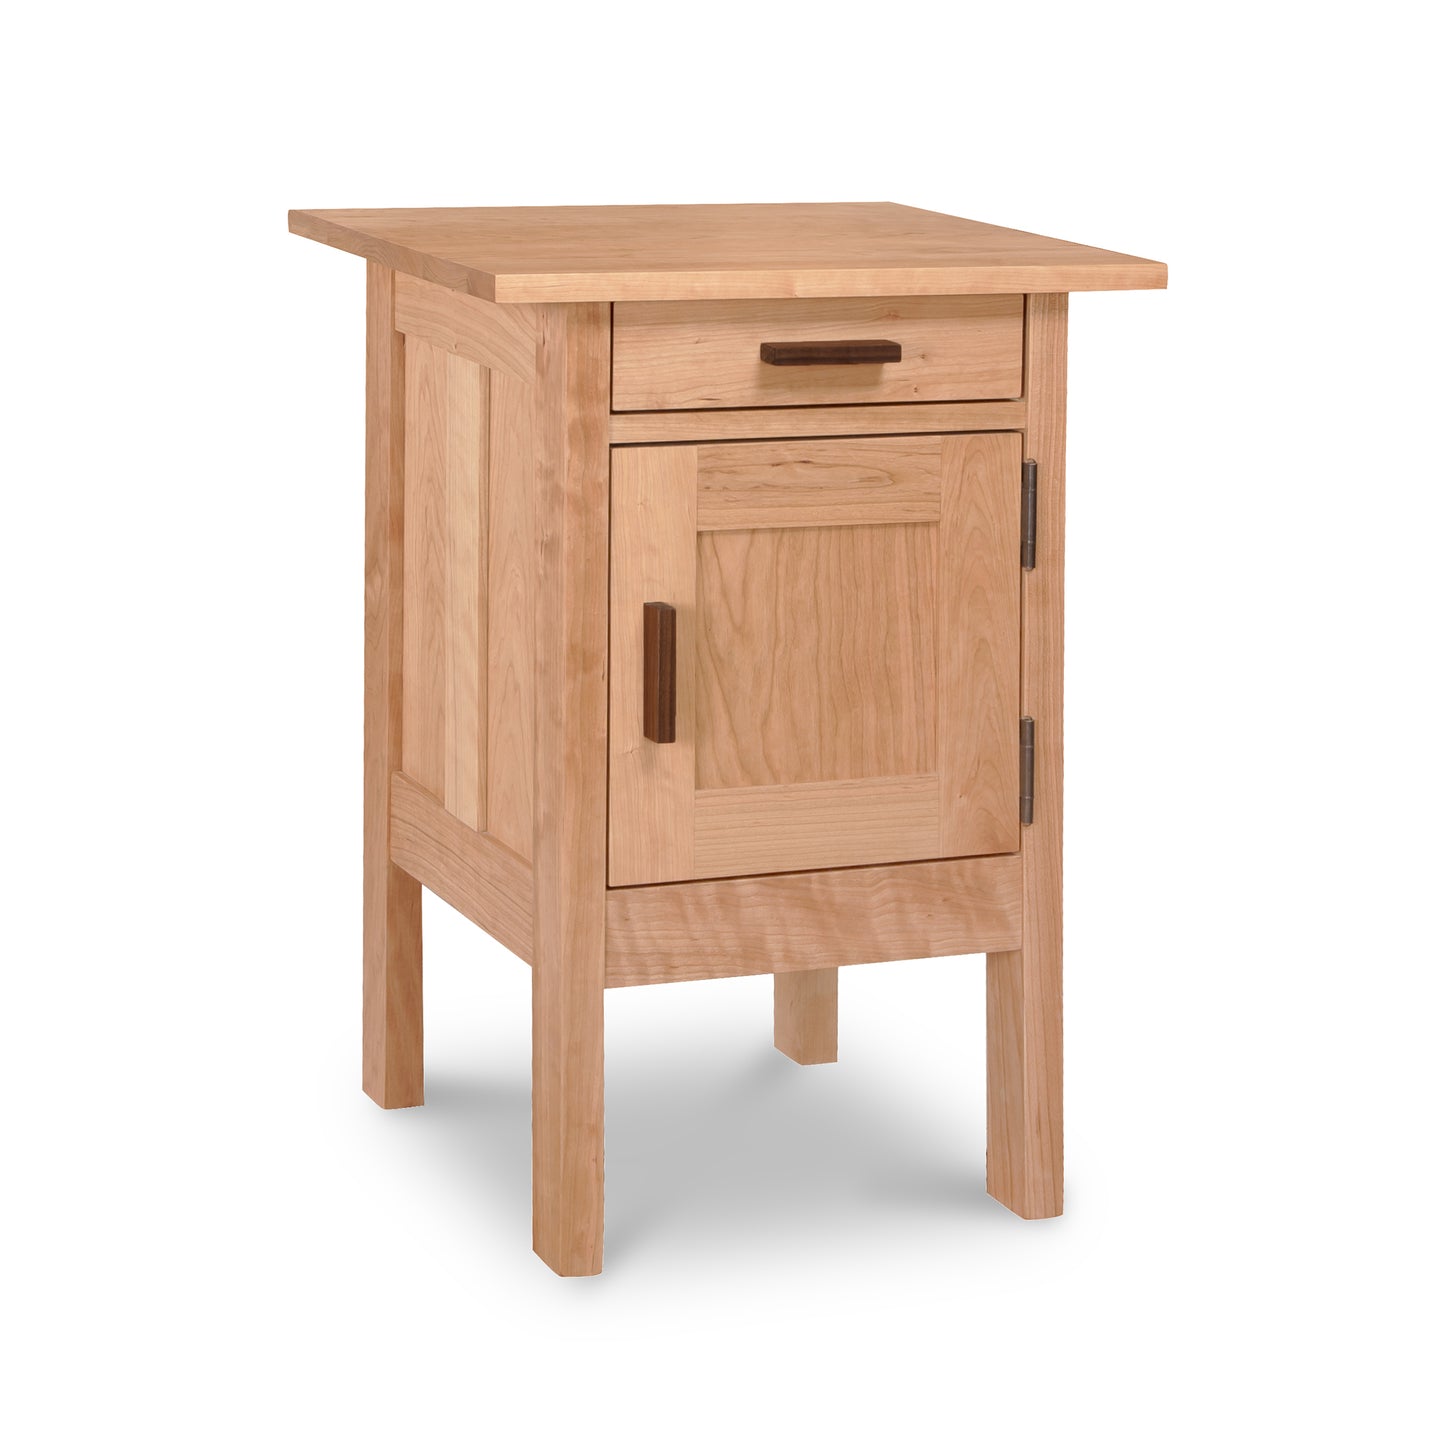 A small wooden Modern Craftsman 1-Drawer Nightstand with Door by Vermont Furniture Designs featuring design elements.